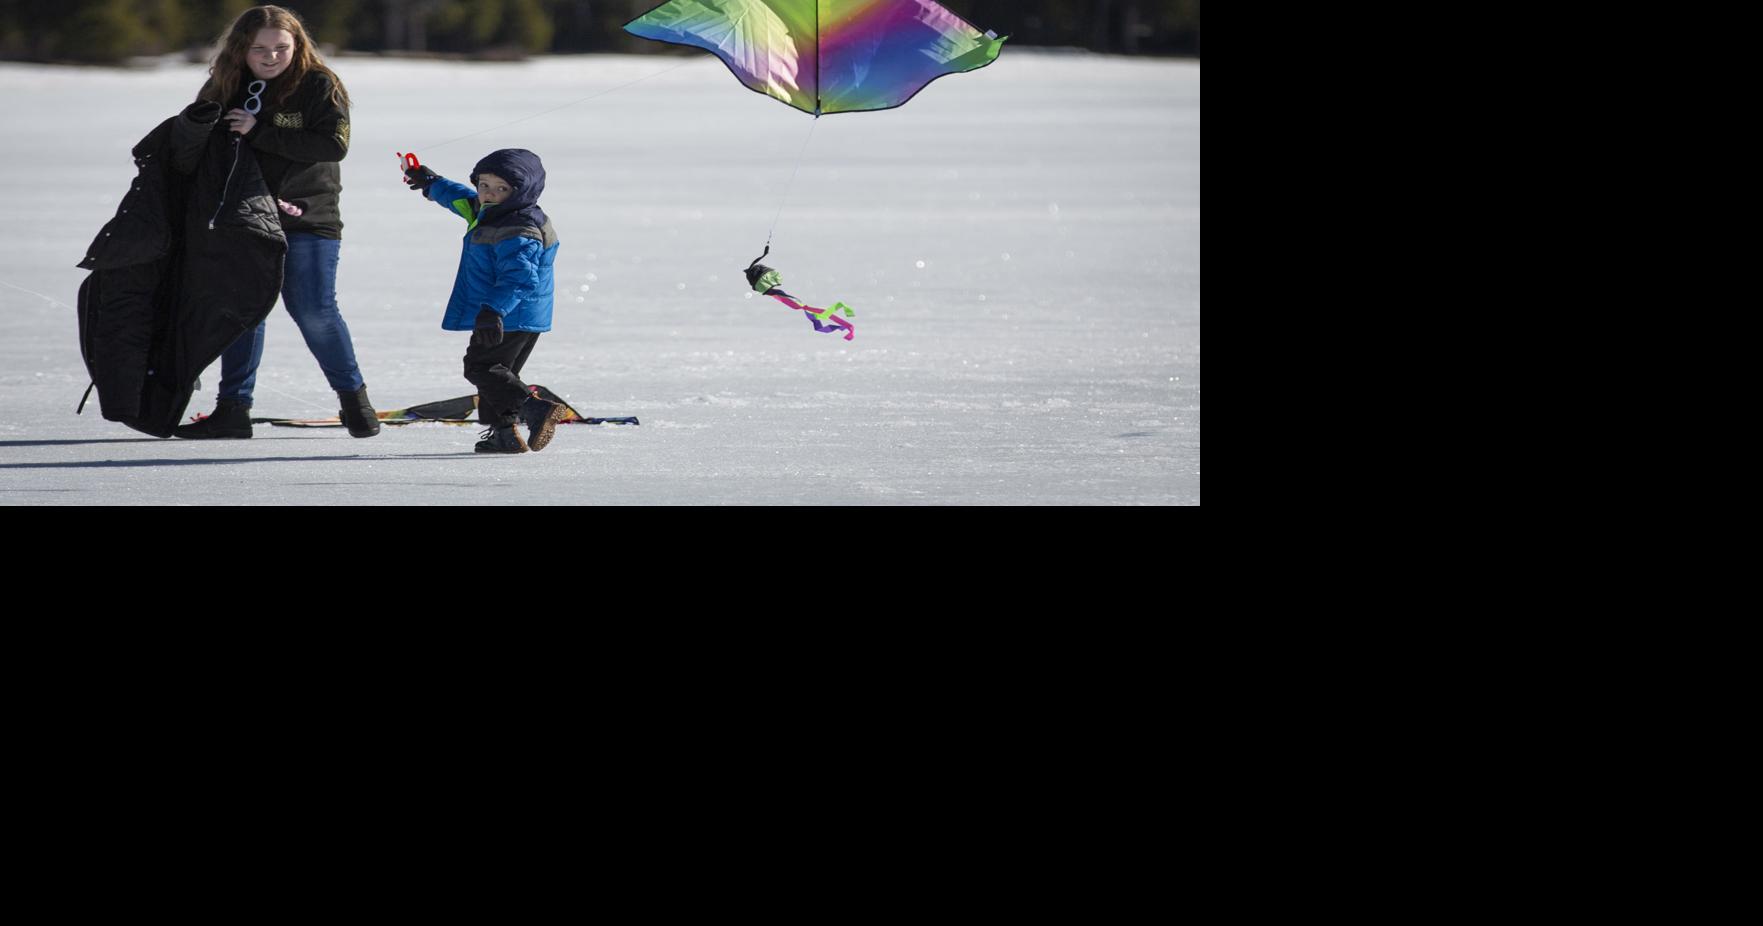 4th Annual Kite Festival at Lake of the Woods Gallery